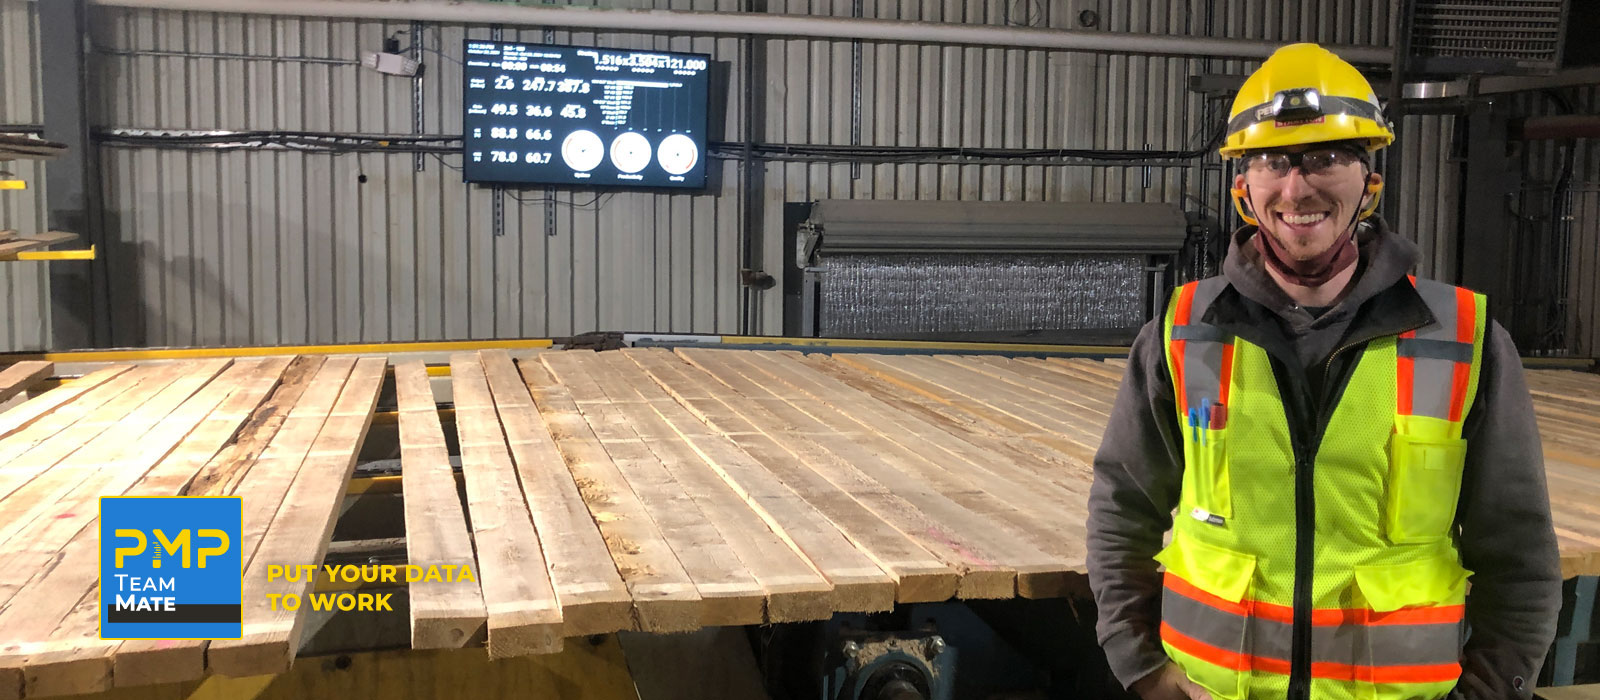 Smiling plant manager in front of lumber line and PMP TeamMate dashboard